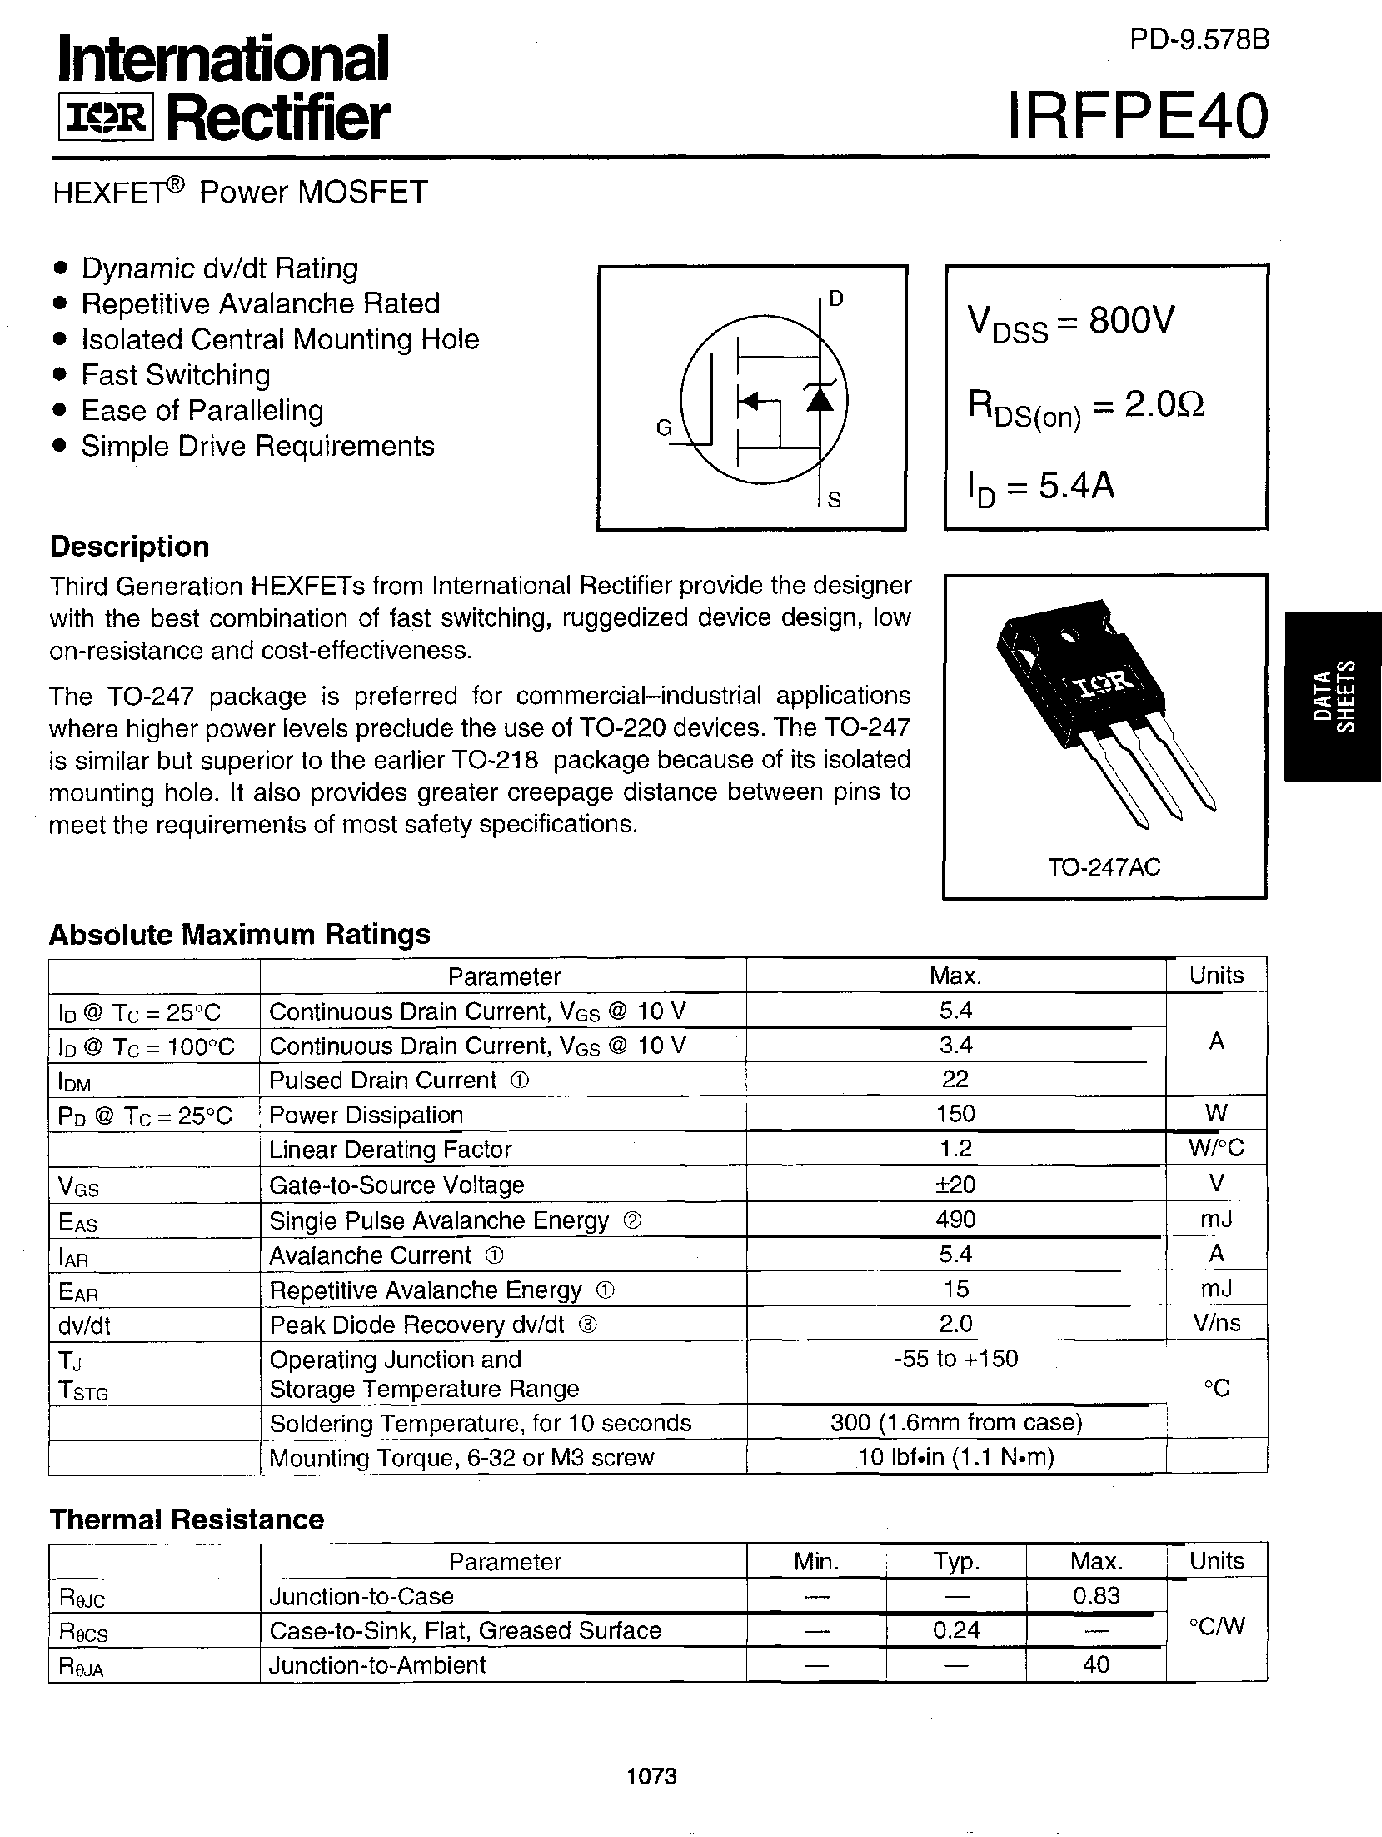 Datasheet IRFPE40 - Power MOSFET page 1